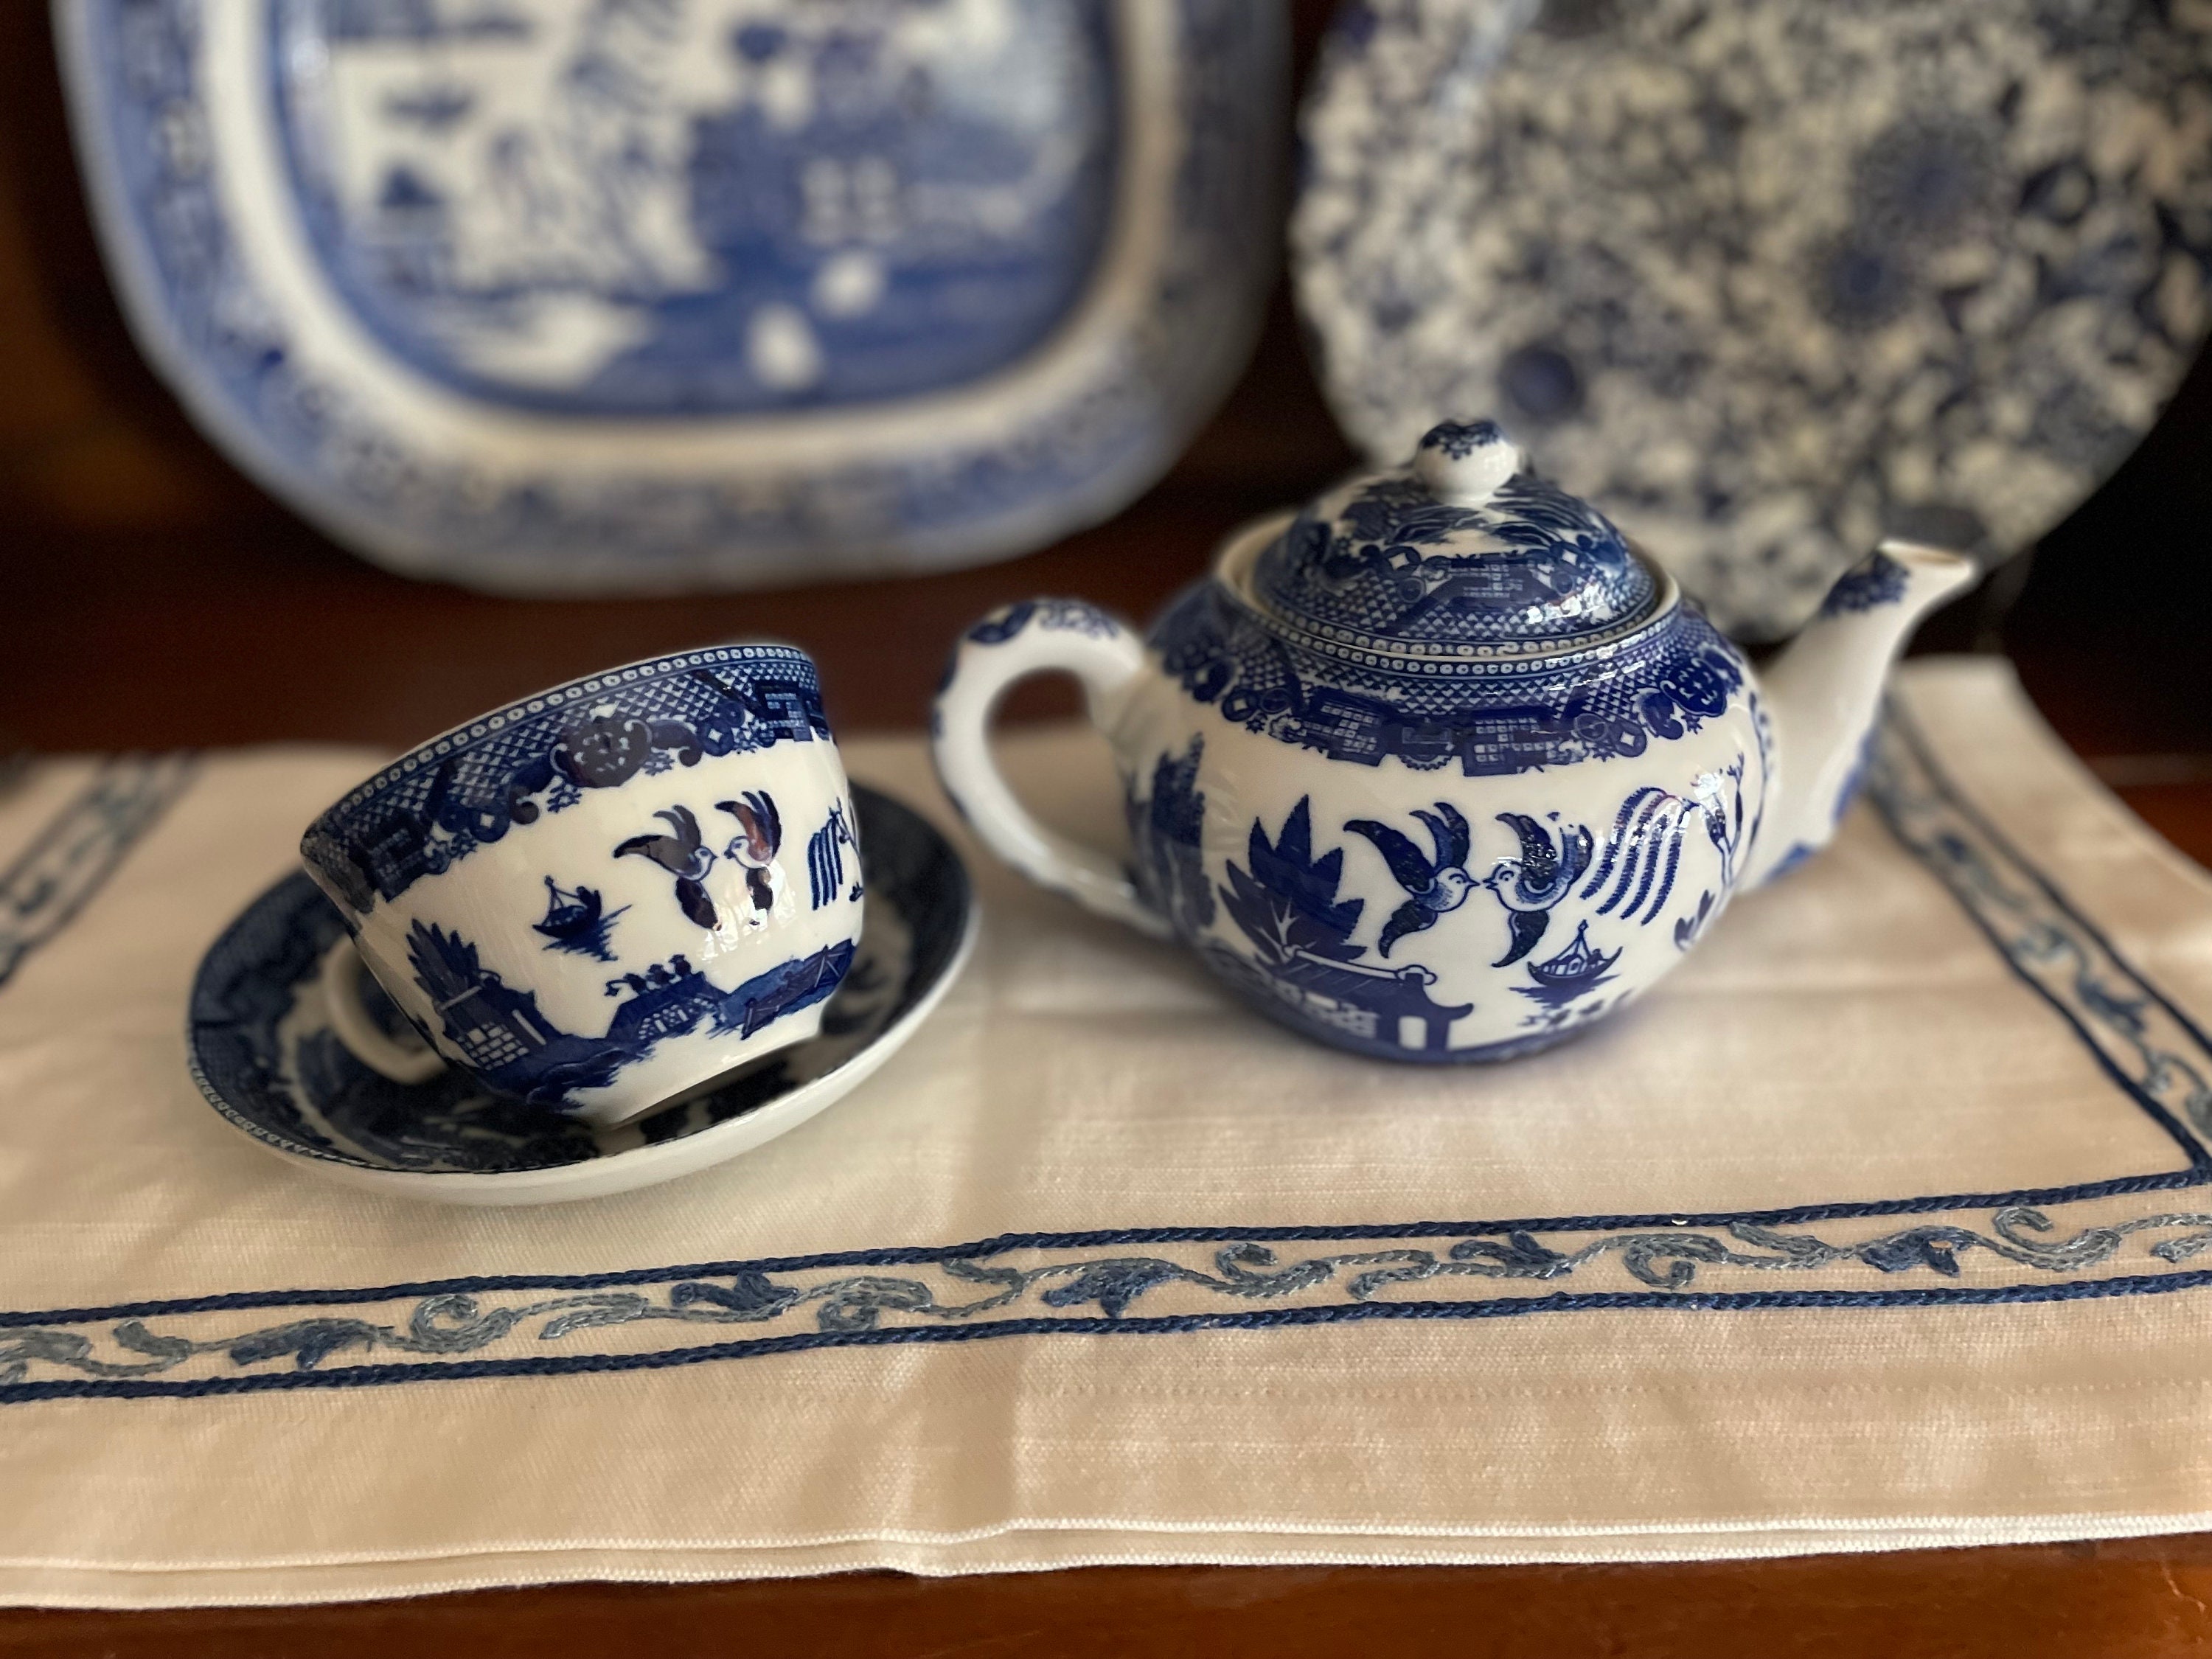 Blue Willow Dishes, Unique Teapot, Delft Blue, Calamityware :Things Could Be Worse Porcelain Chinaware, Antique Art Mugs, Teapot+Sugar & Creamer+2